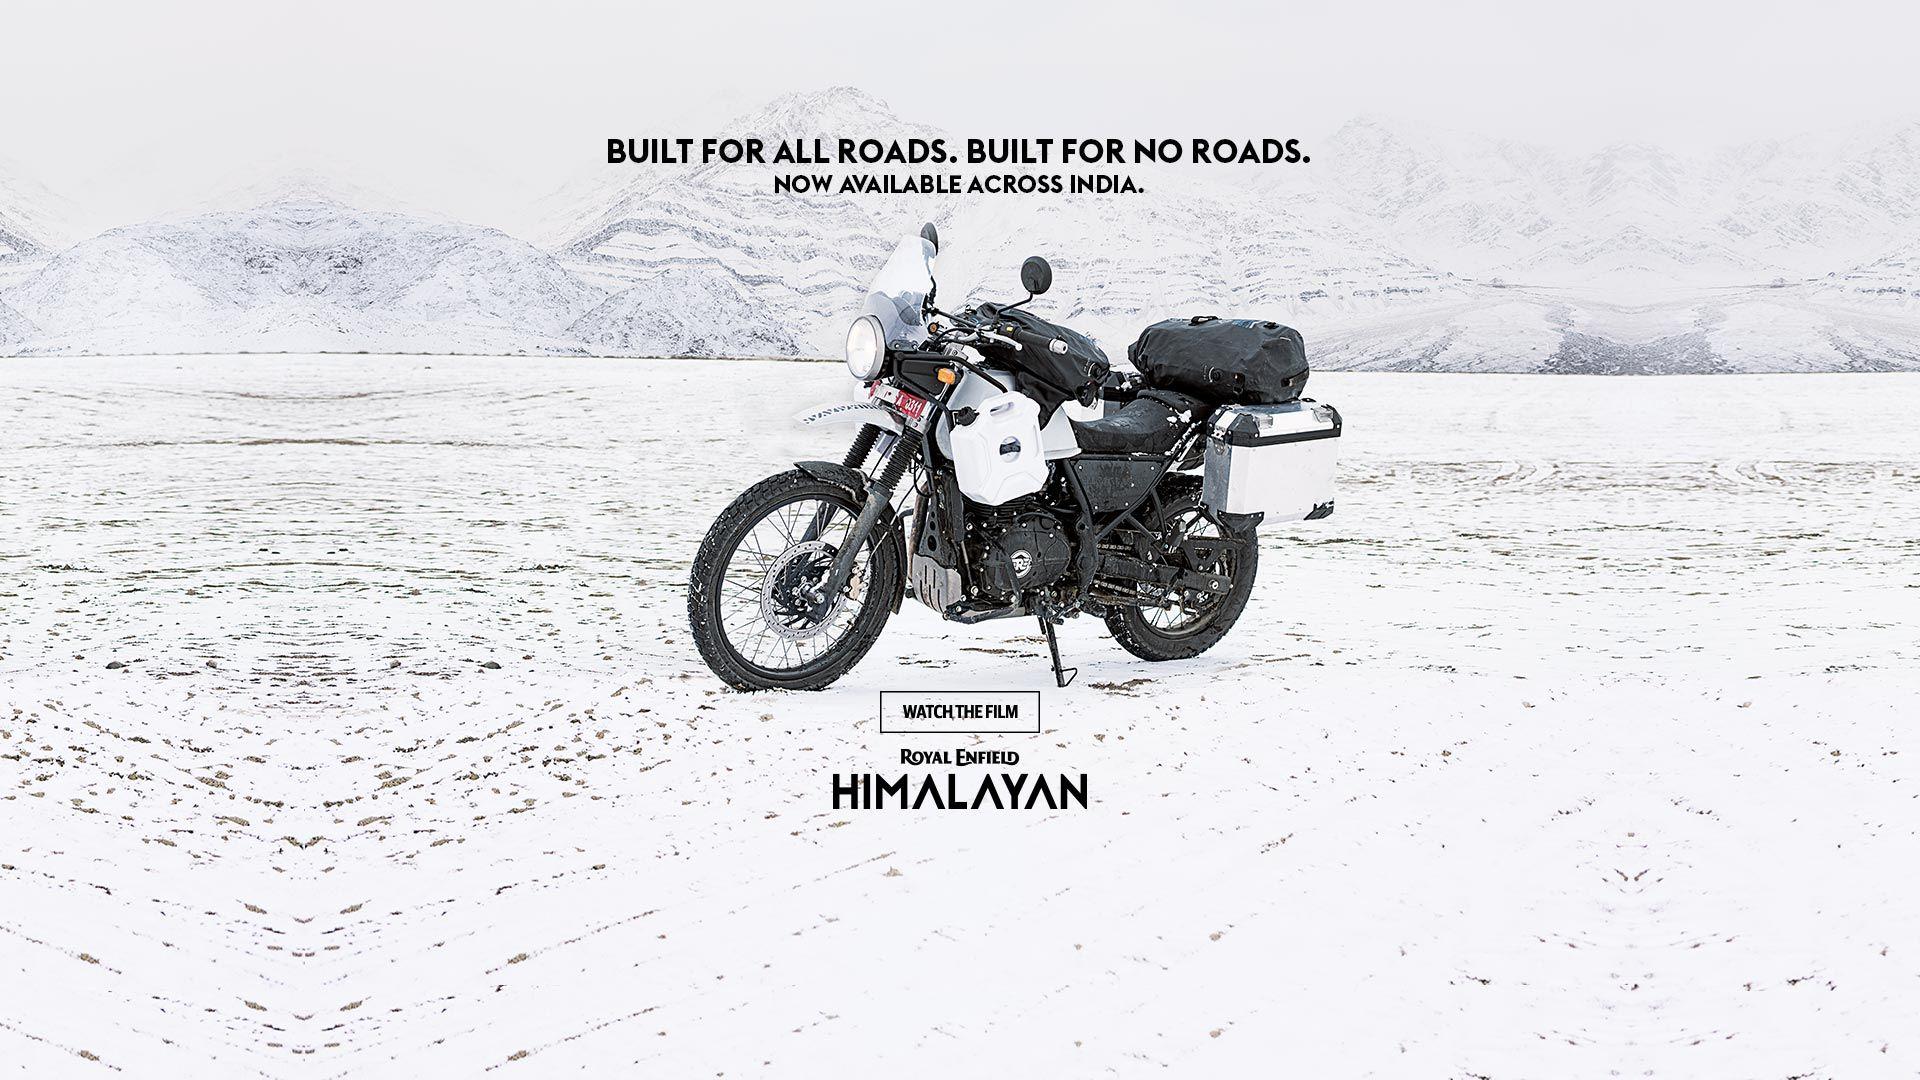 Royal Enfield introduces the all new Himalayan motorcycle. A